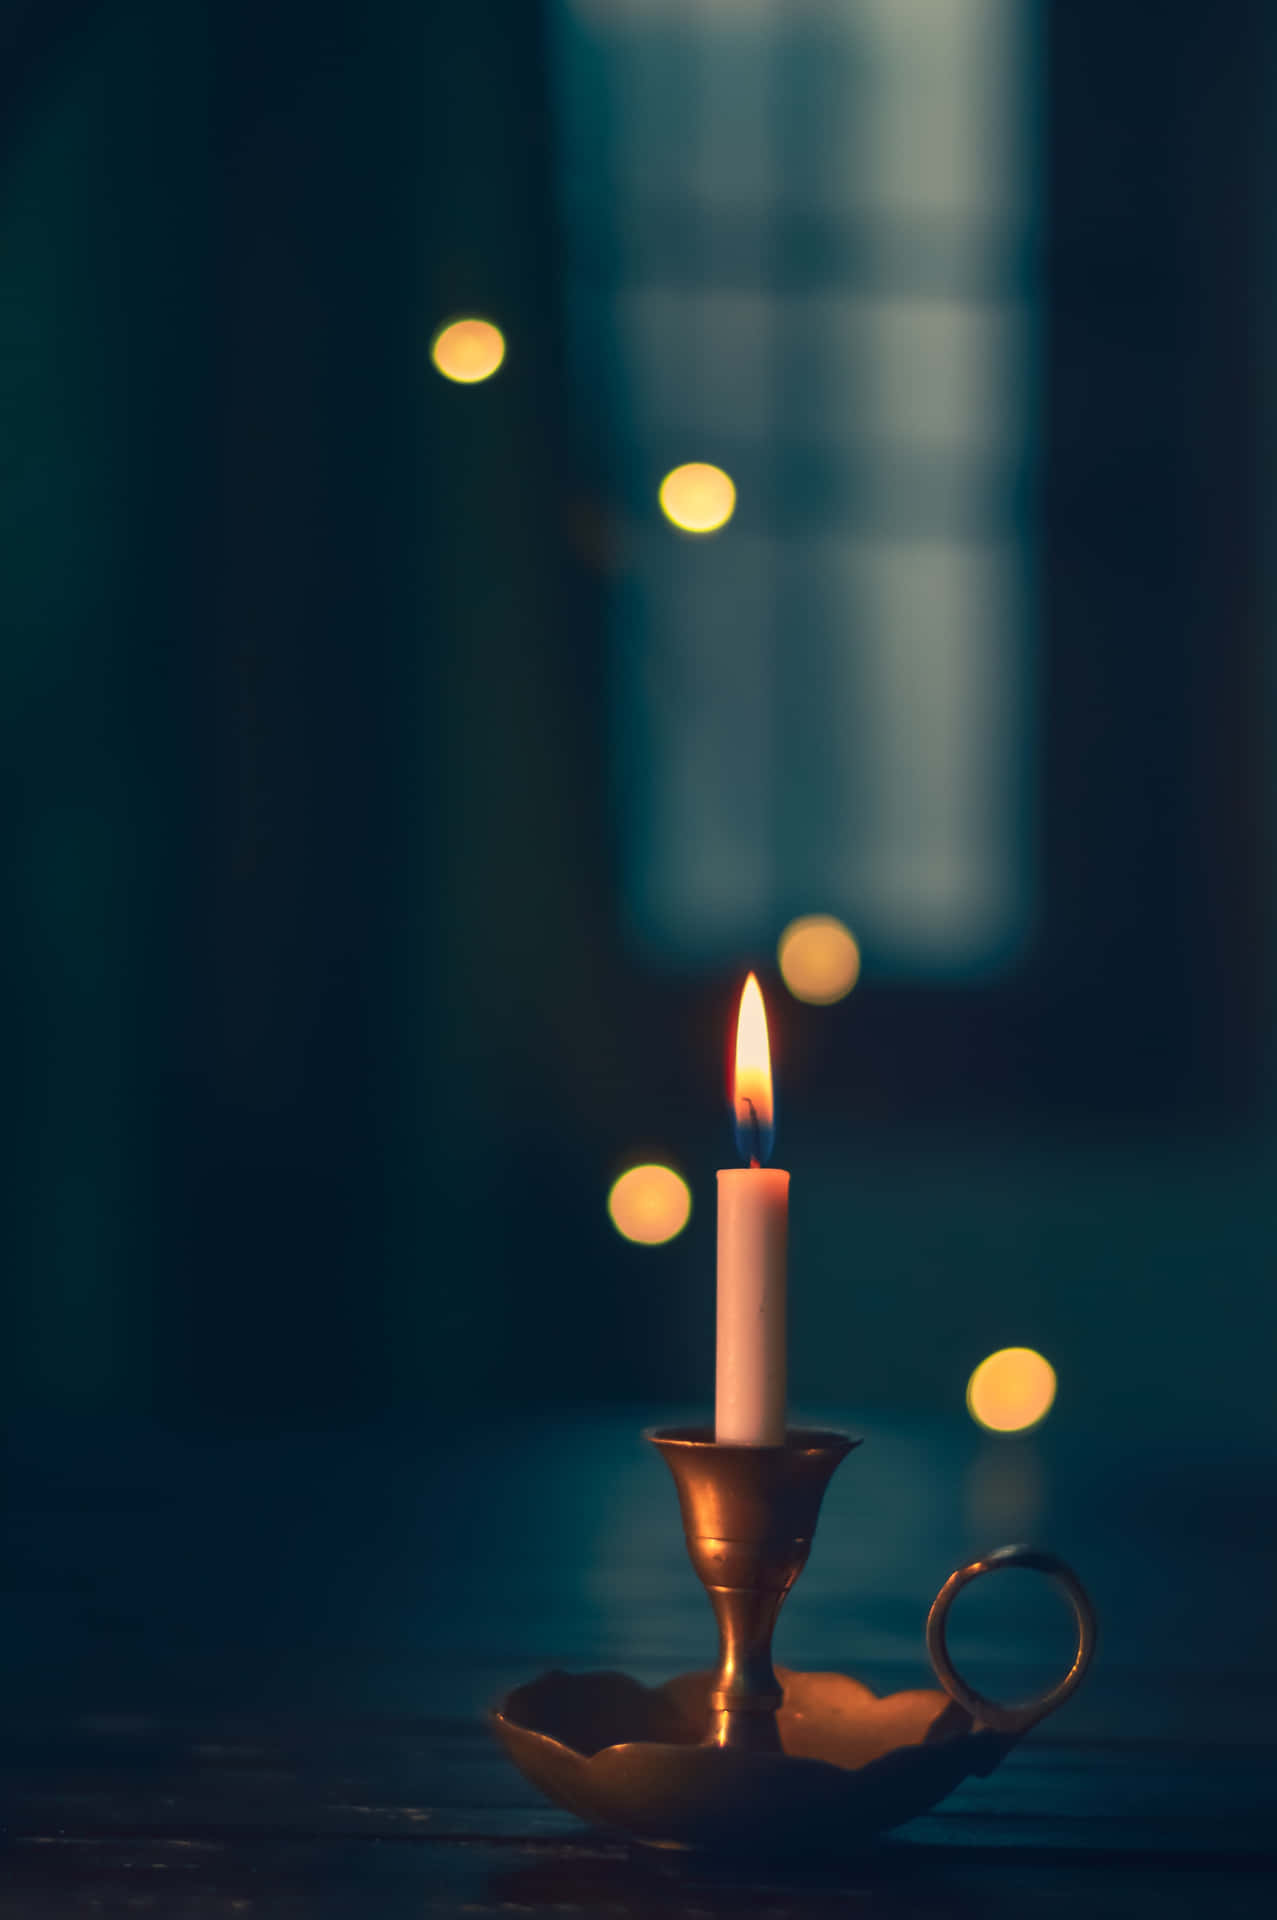 Feel the warmth of light with a burning candle.